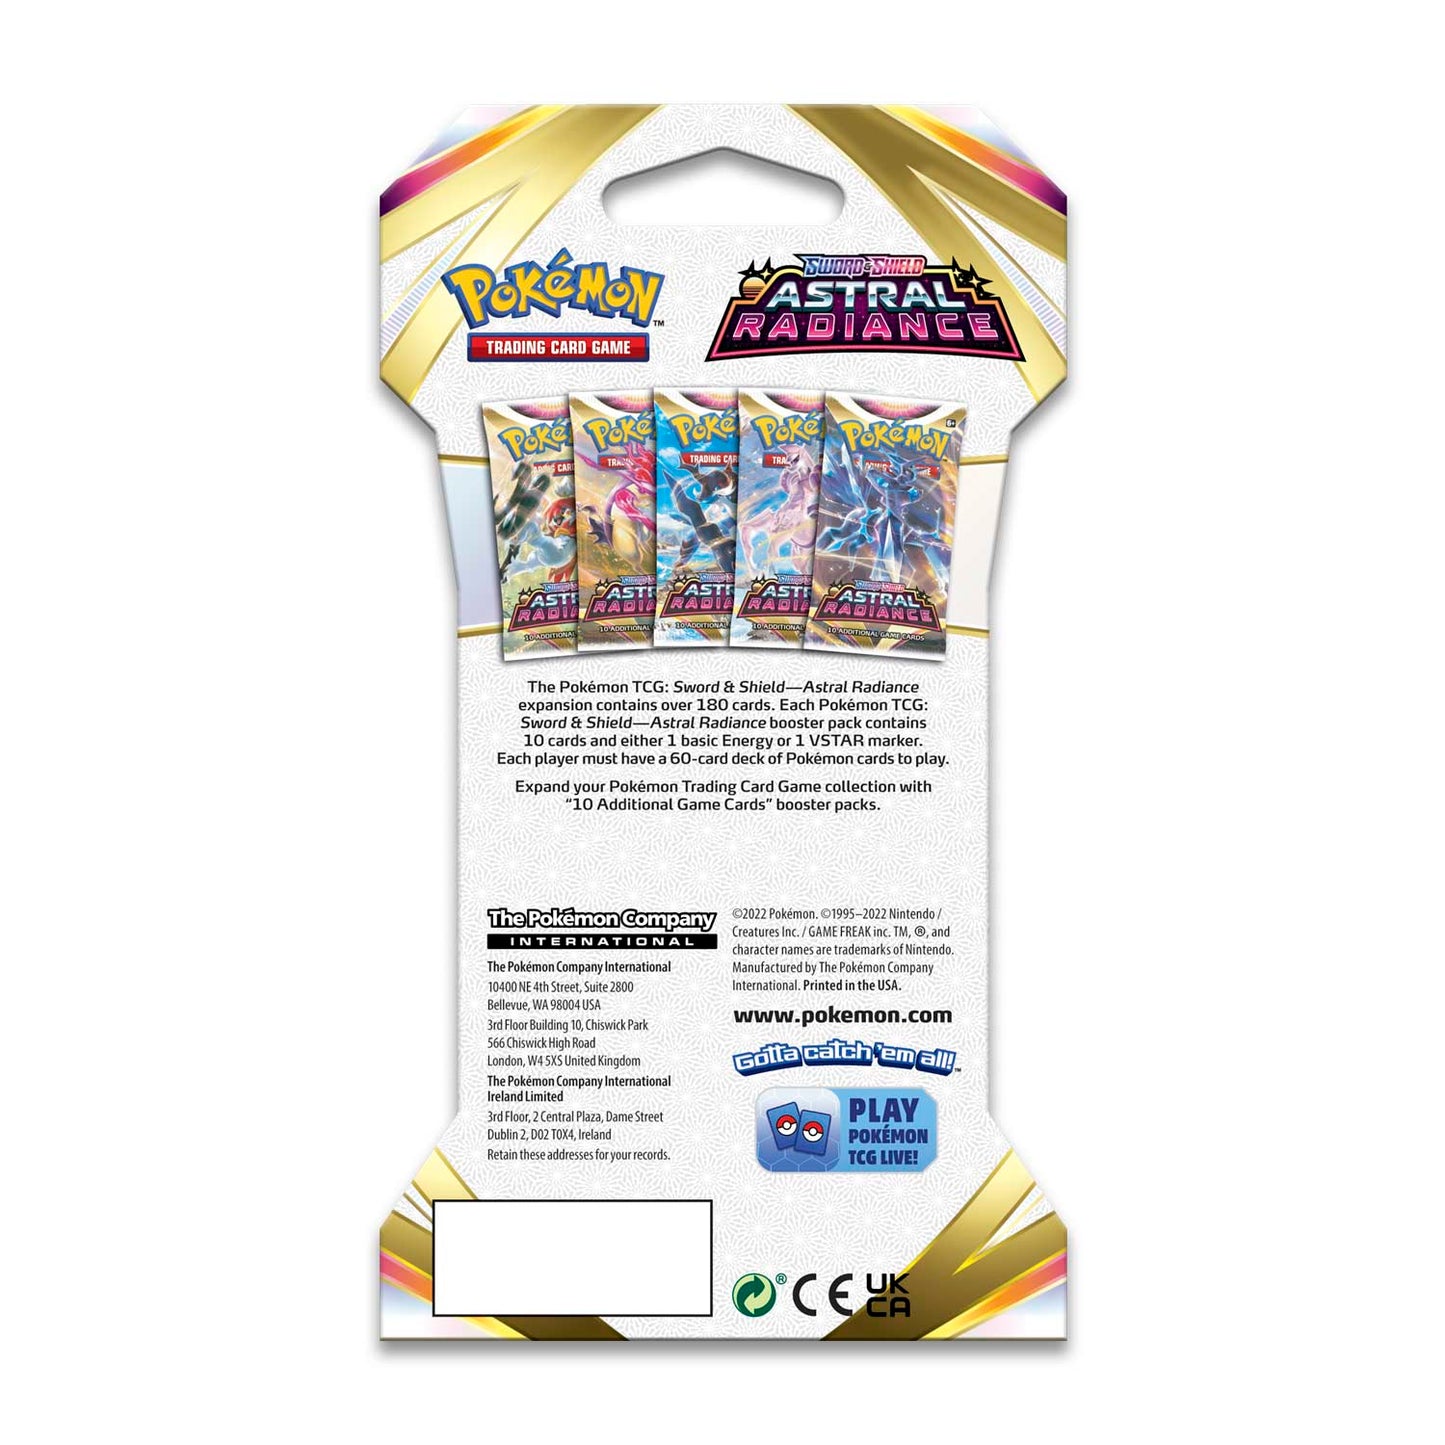 back side of a single blister shows available variants and explains that there are 10 cards in each pack along with either an energy or VStar card as well.